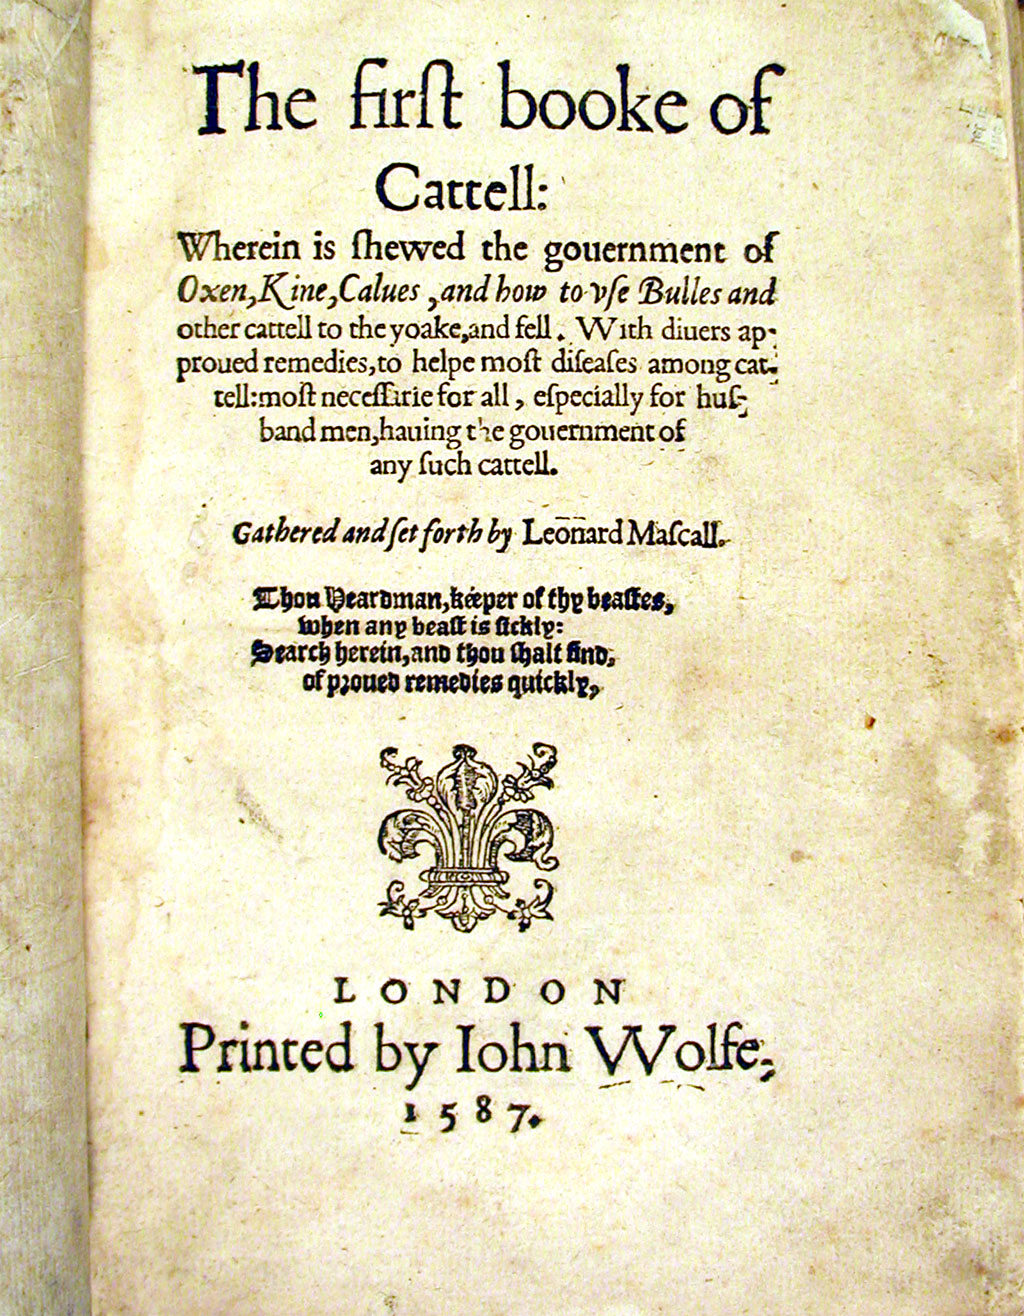 Title page of first book